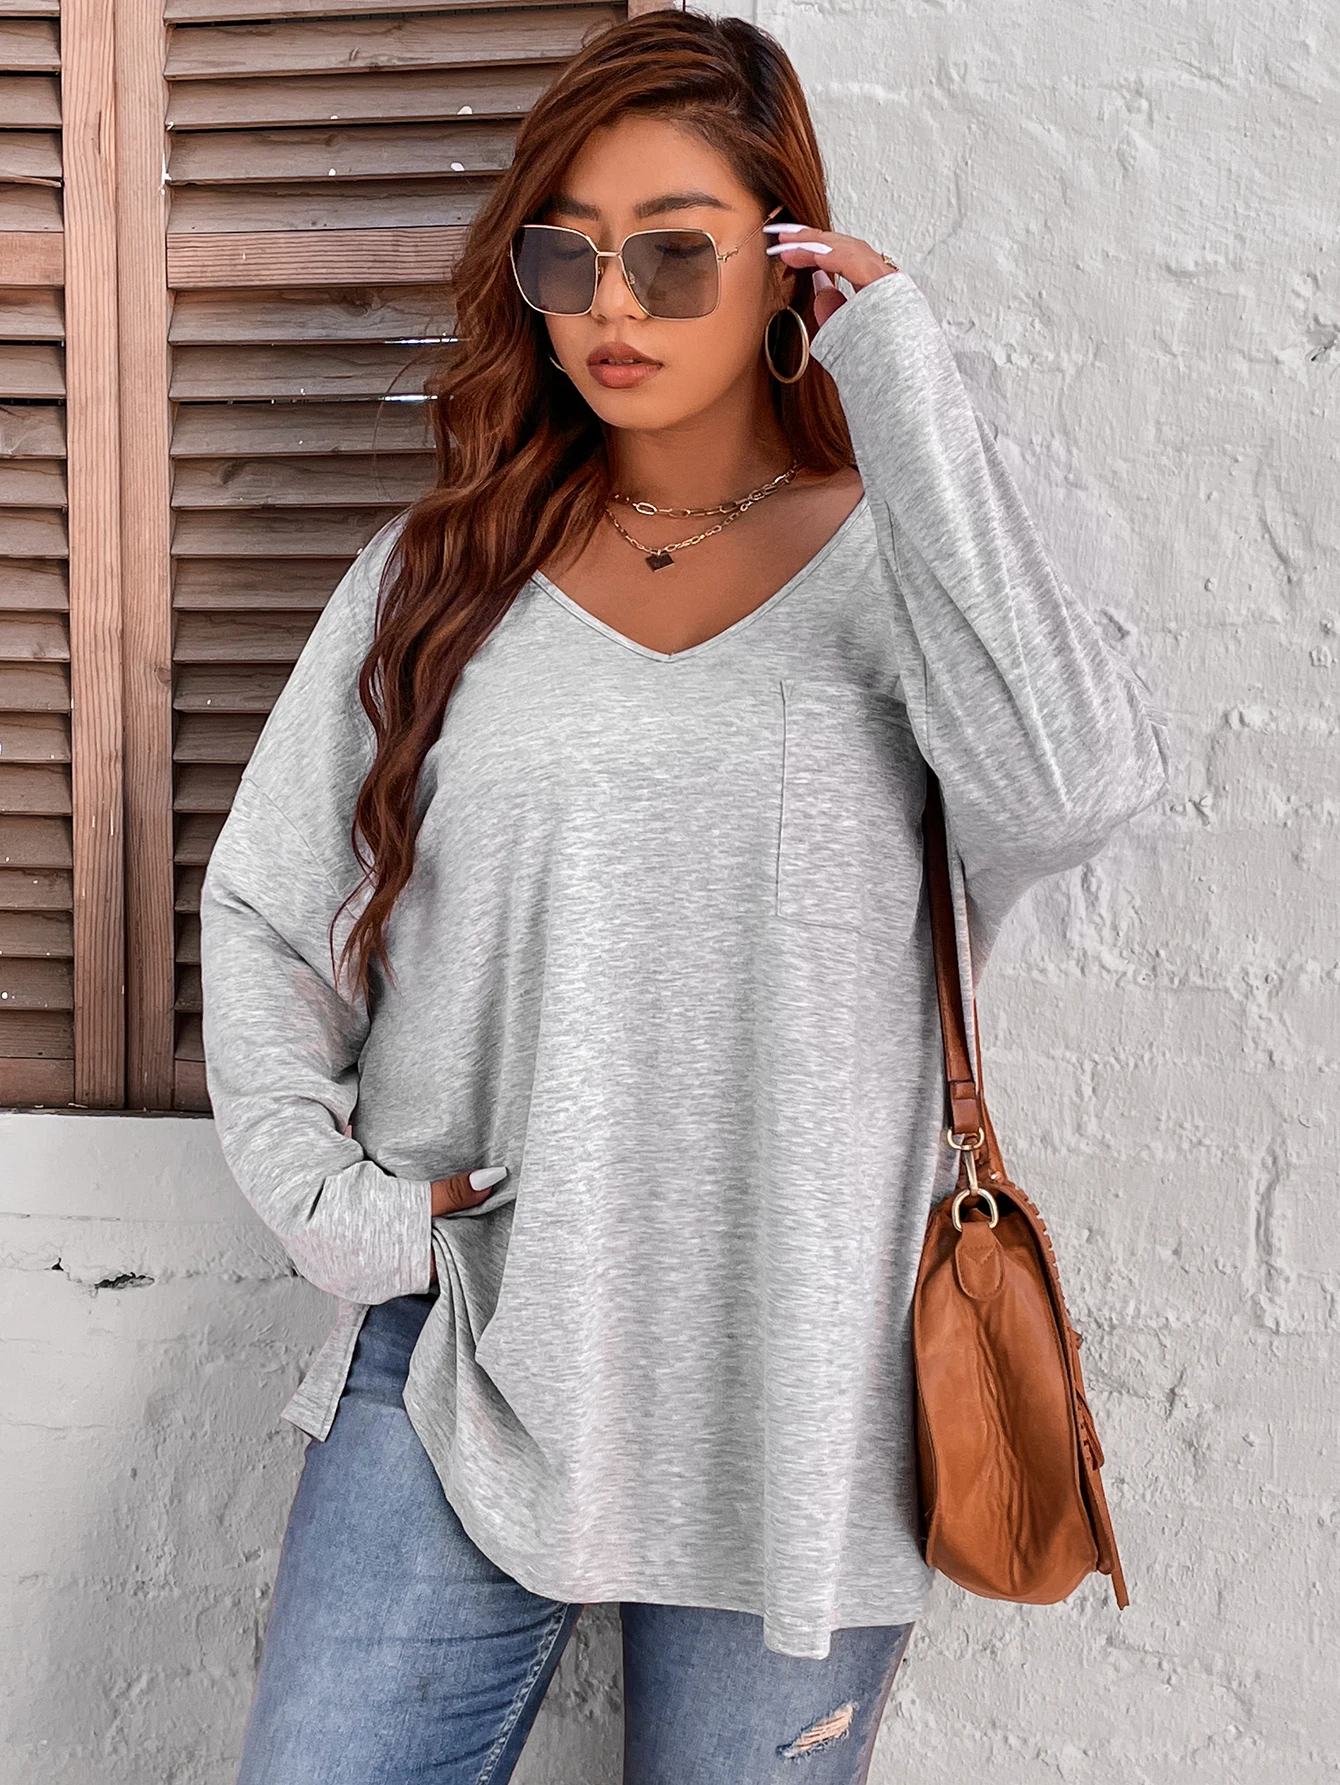 Plus Size Blouse Tops Women Autumn Summer 2022 Grey Solid Pocket Long Sleeve Clothing Loose Oversized Ladies Large T-shirts 4xl